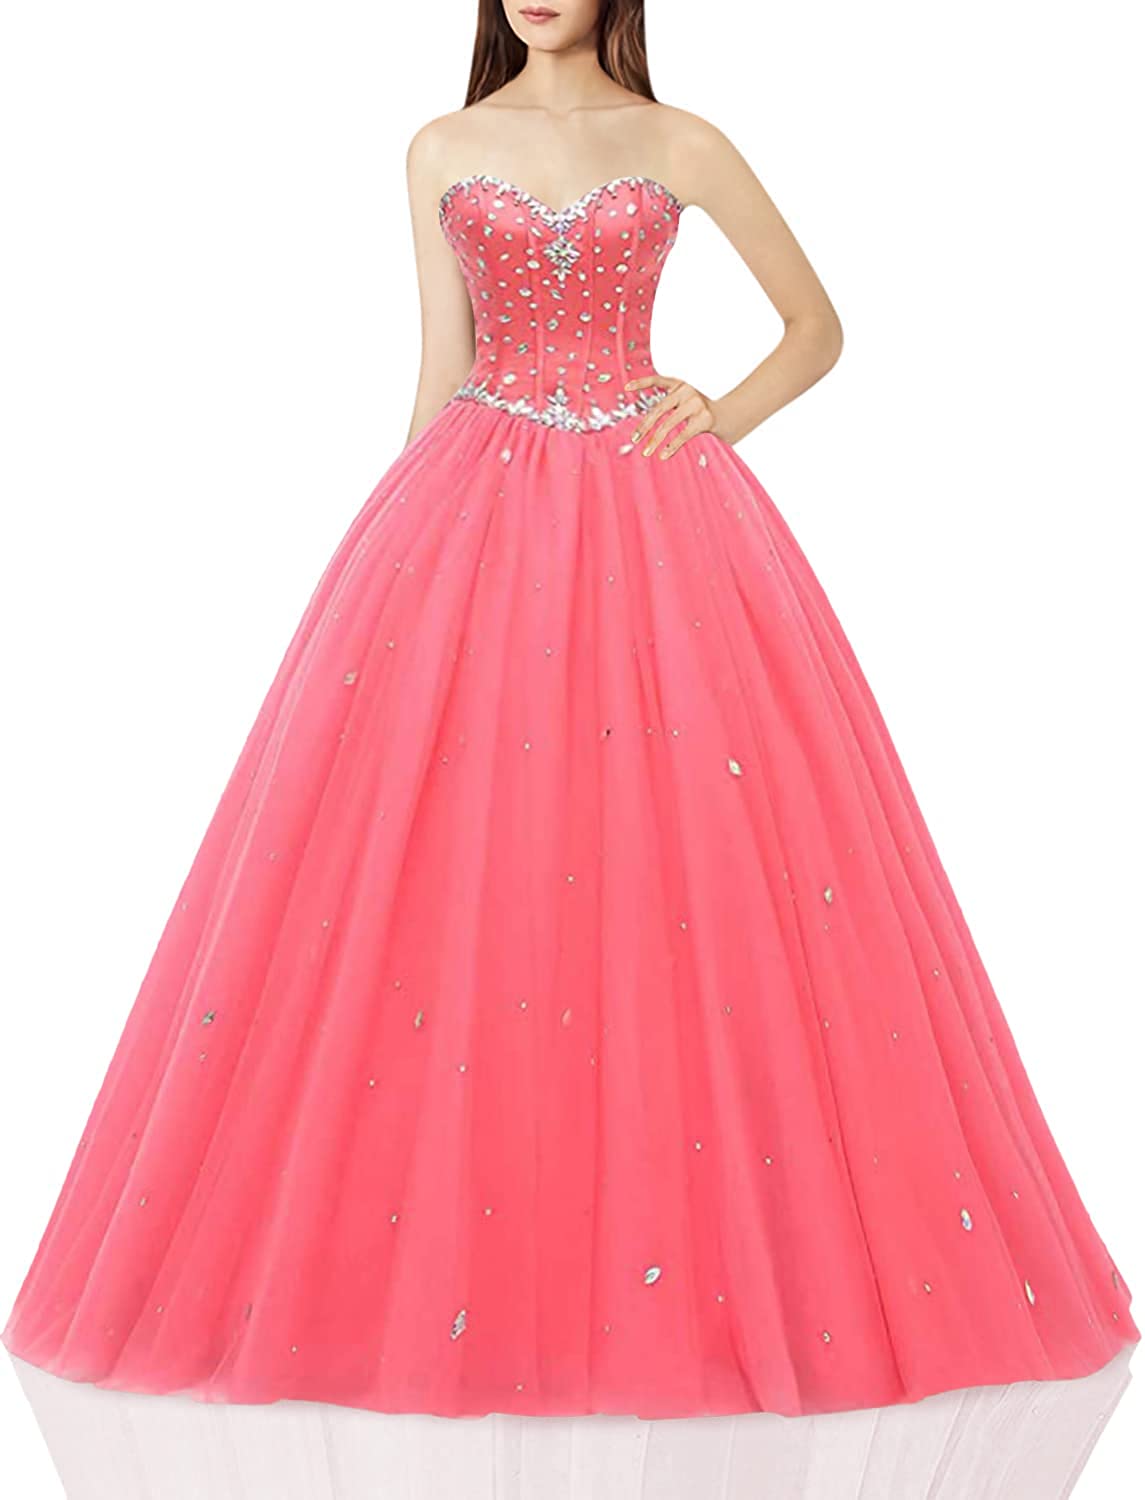 Likedpage Womens Sweetheart Ball Gown Tulle Quinceanera Dresses Prom Dress Ebay 